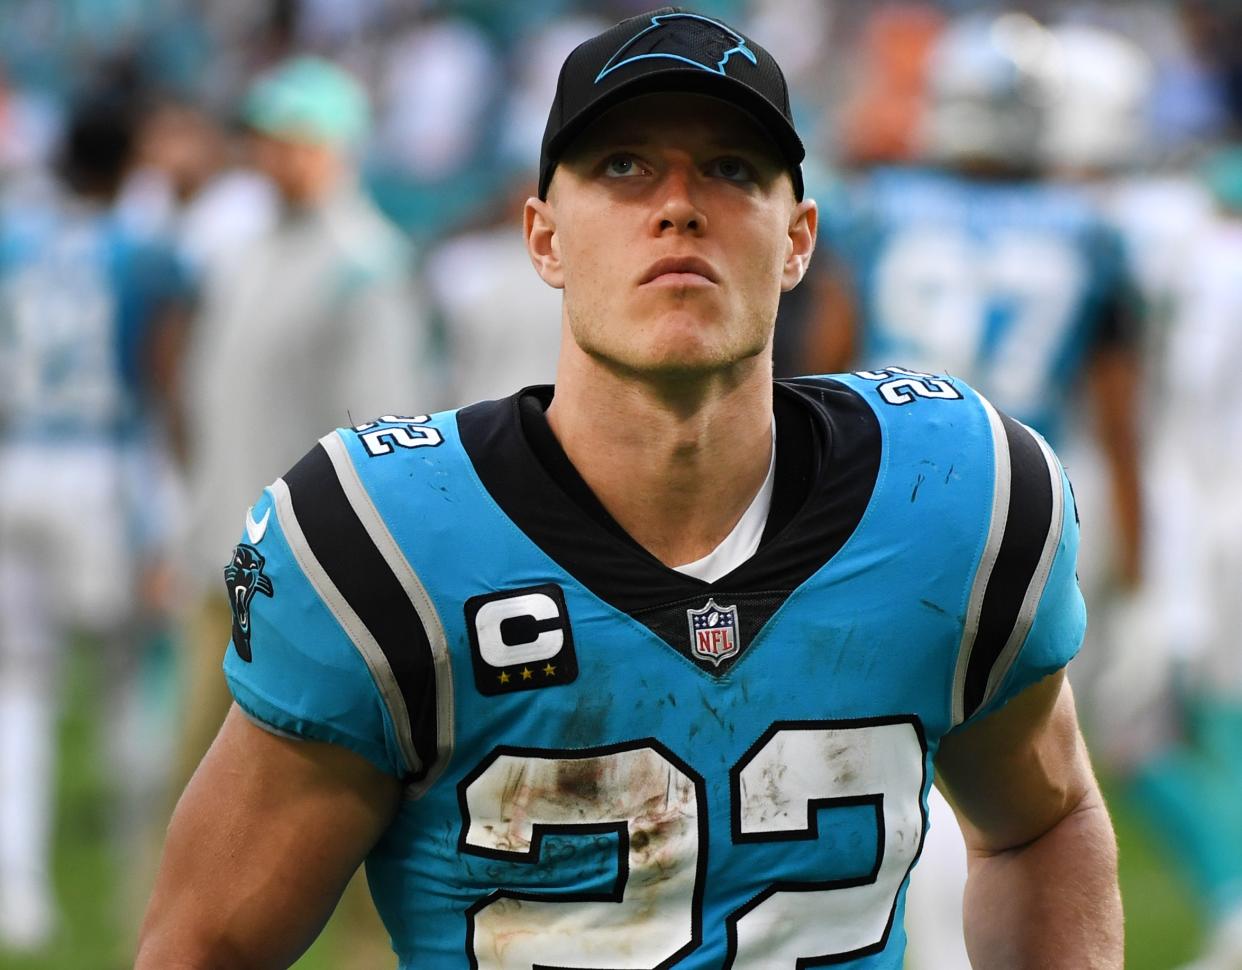 MIAMI GARDENS, FLORIDA - NOVEMBER 28: Christian McCaffrey #22 of the Carolina Panthers leaves the field after the game against the Miami Dolphins at Hard Rock Stadium on November 28, 2021 in Miami Gardens, Florida. Miami defeated Carolina 33-10 (Photo by Eric Espada/Getty Images)